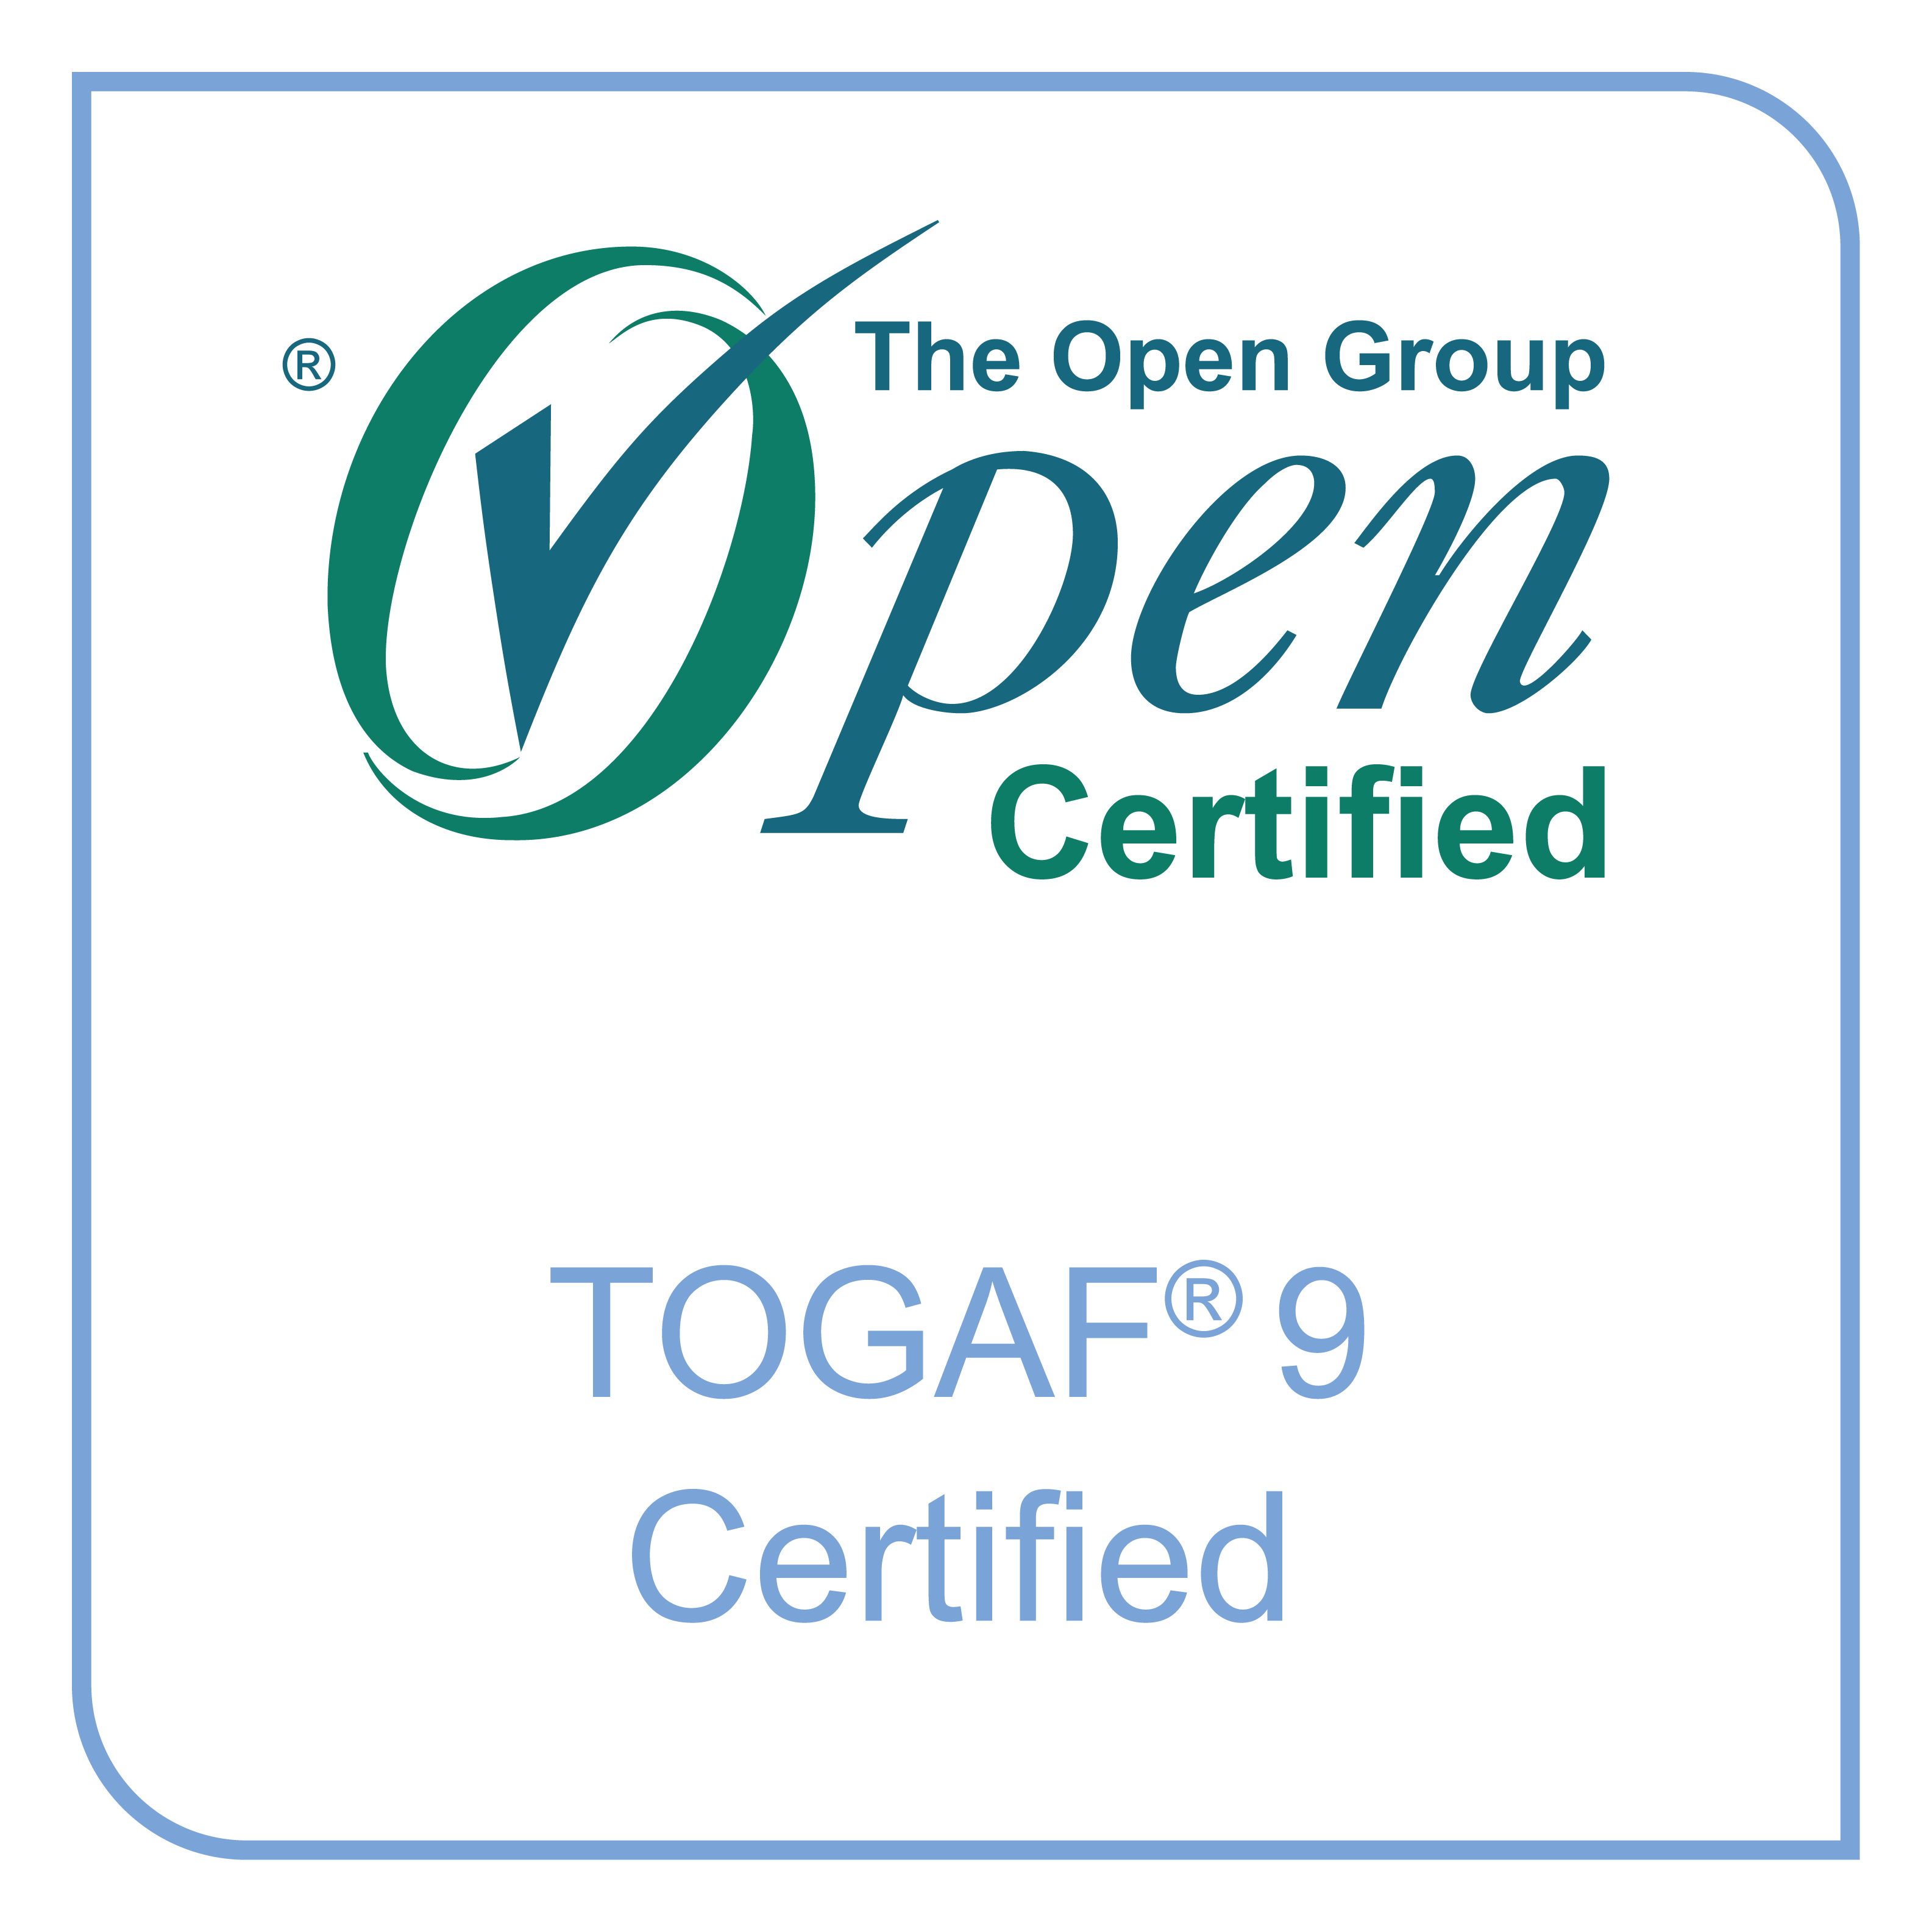 The Open Group Certified: TOGAF 9 Certified